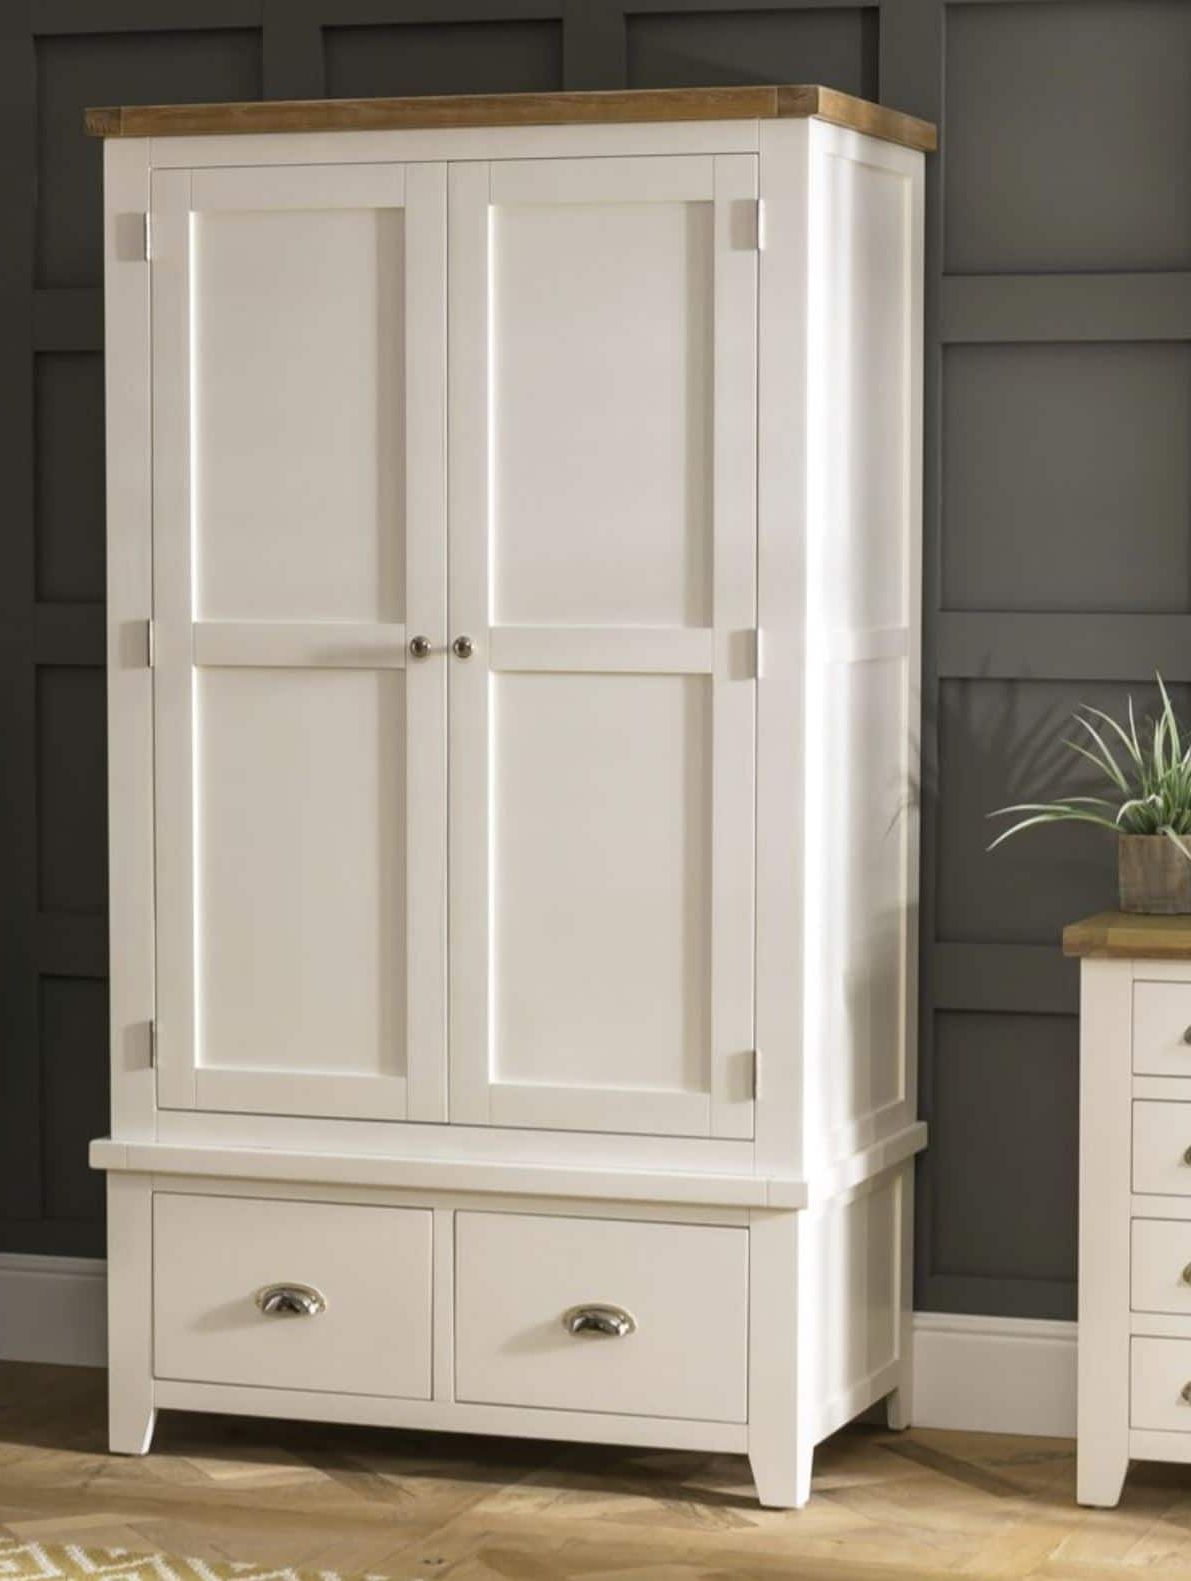 Classic Country Style: Cream Double Wardrobe With Draws Regarding Cream Wardrobes (View 9 of 20)